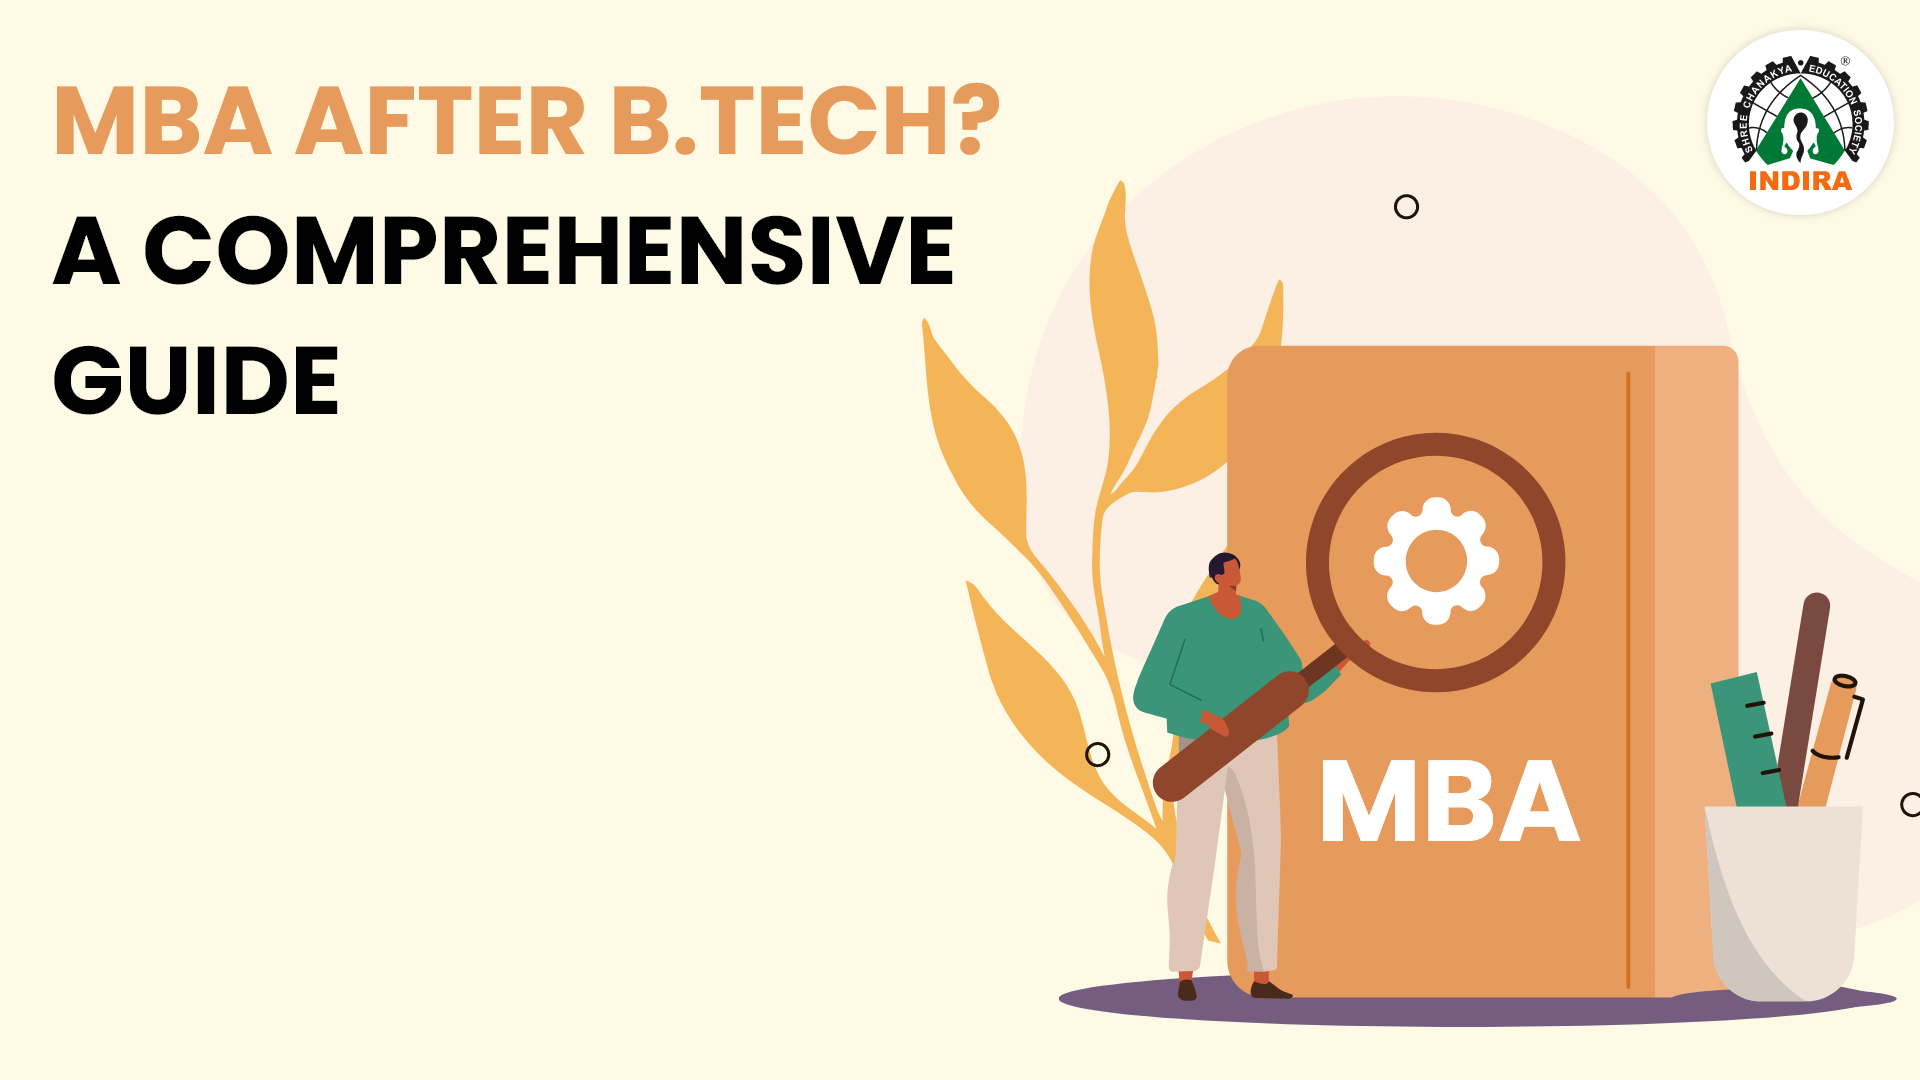 MBA after B.Tech? A Comprehensive Guide!